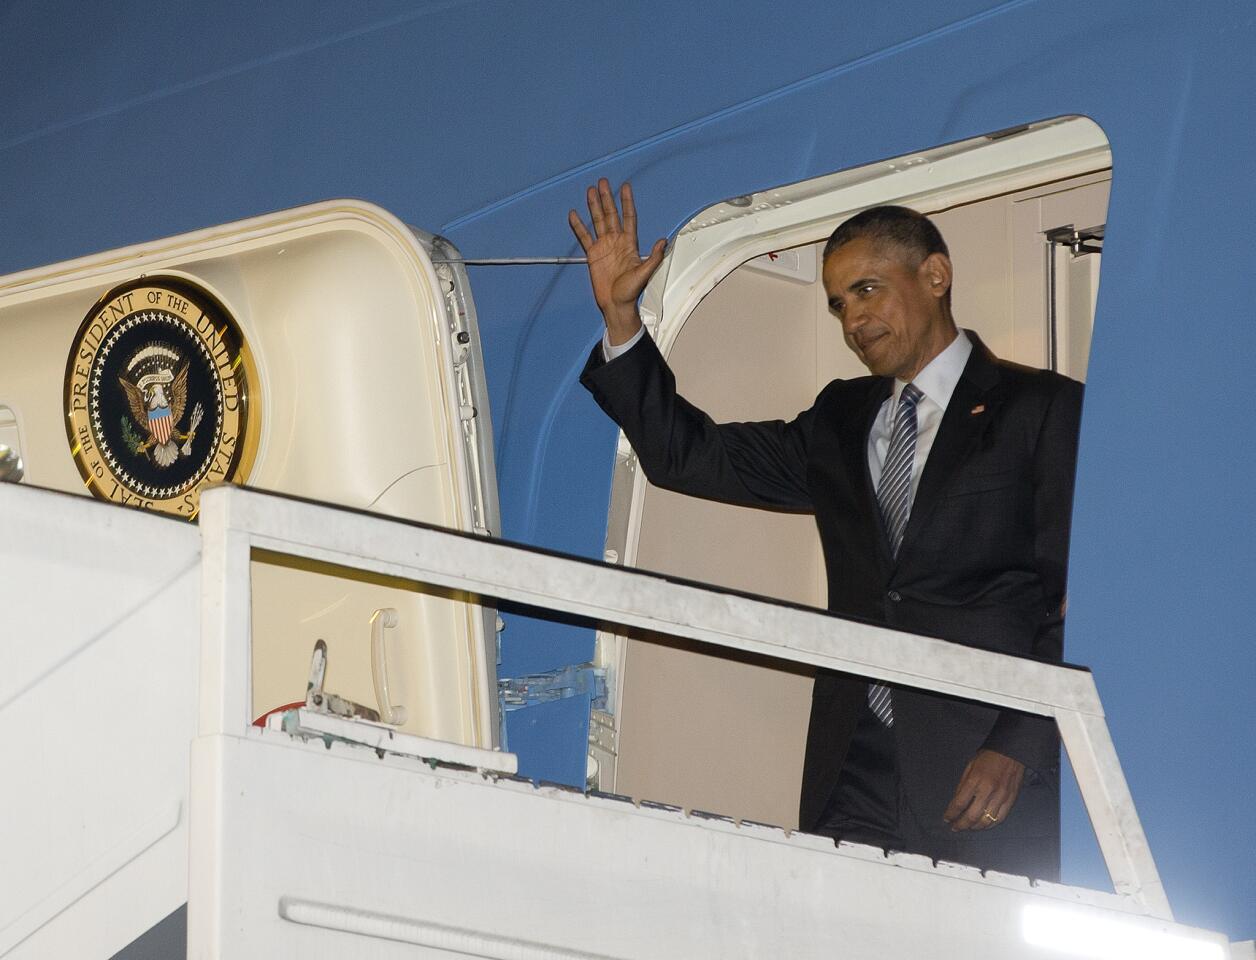 President Barack Obama exits Air Force One at the international Buenos Aires airport, Argentina, early Wednesday, March 23, 2016. Obama is on a two day official visit to Argentina.